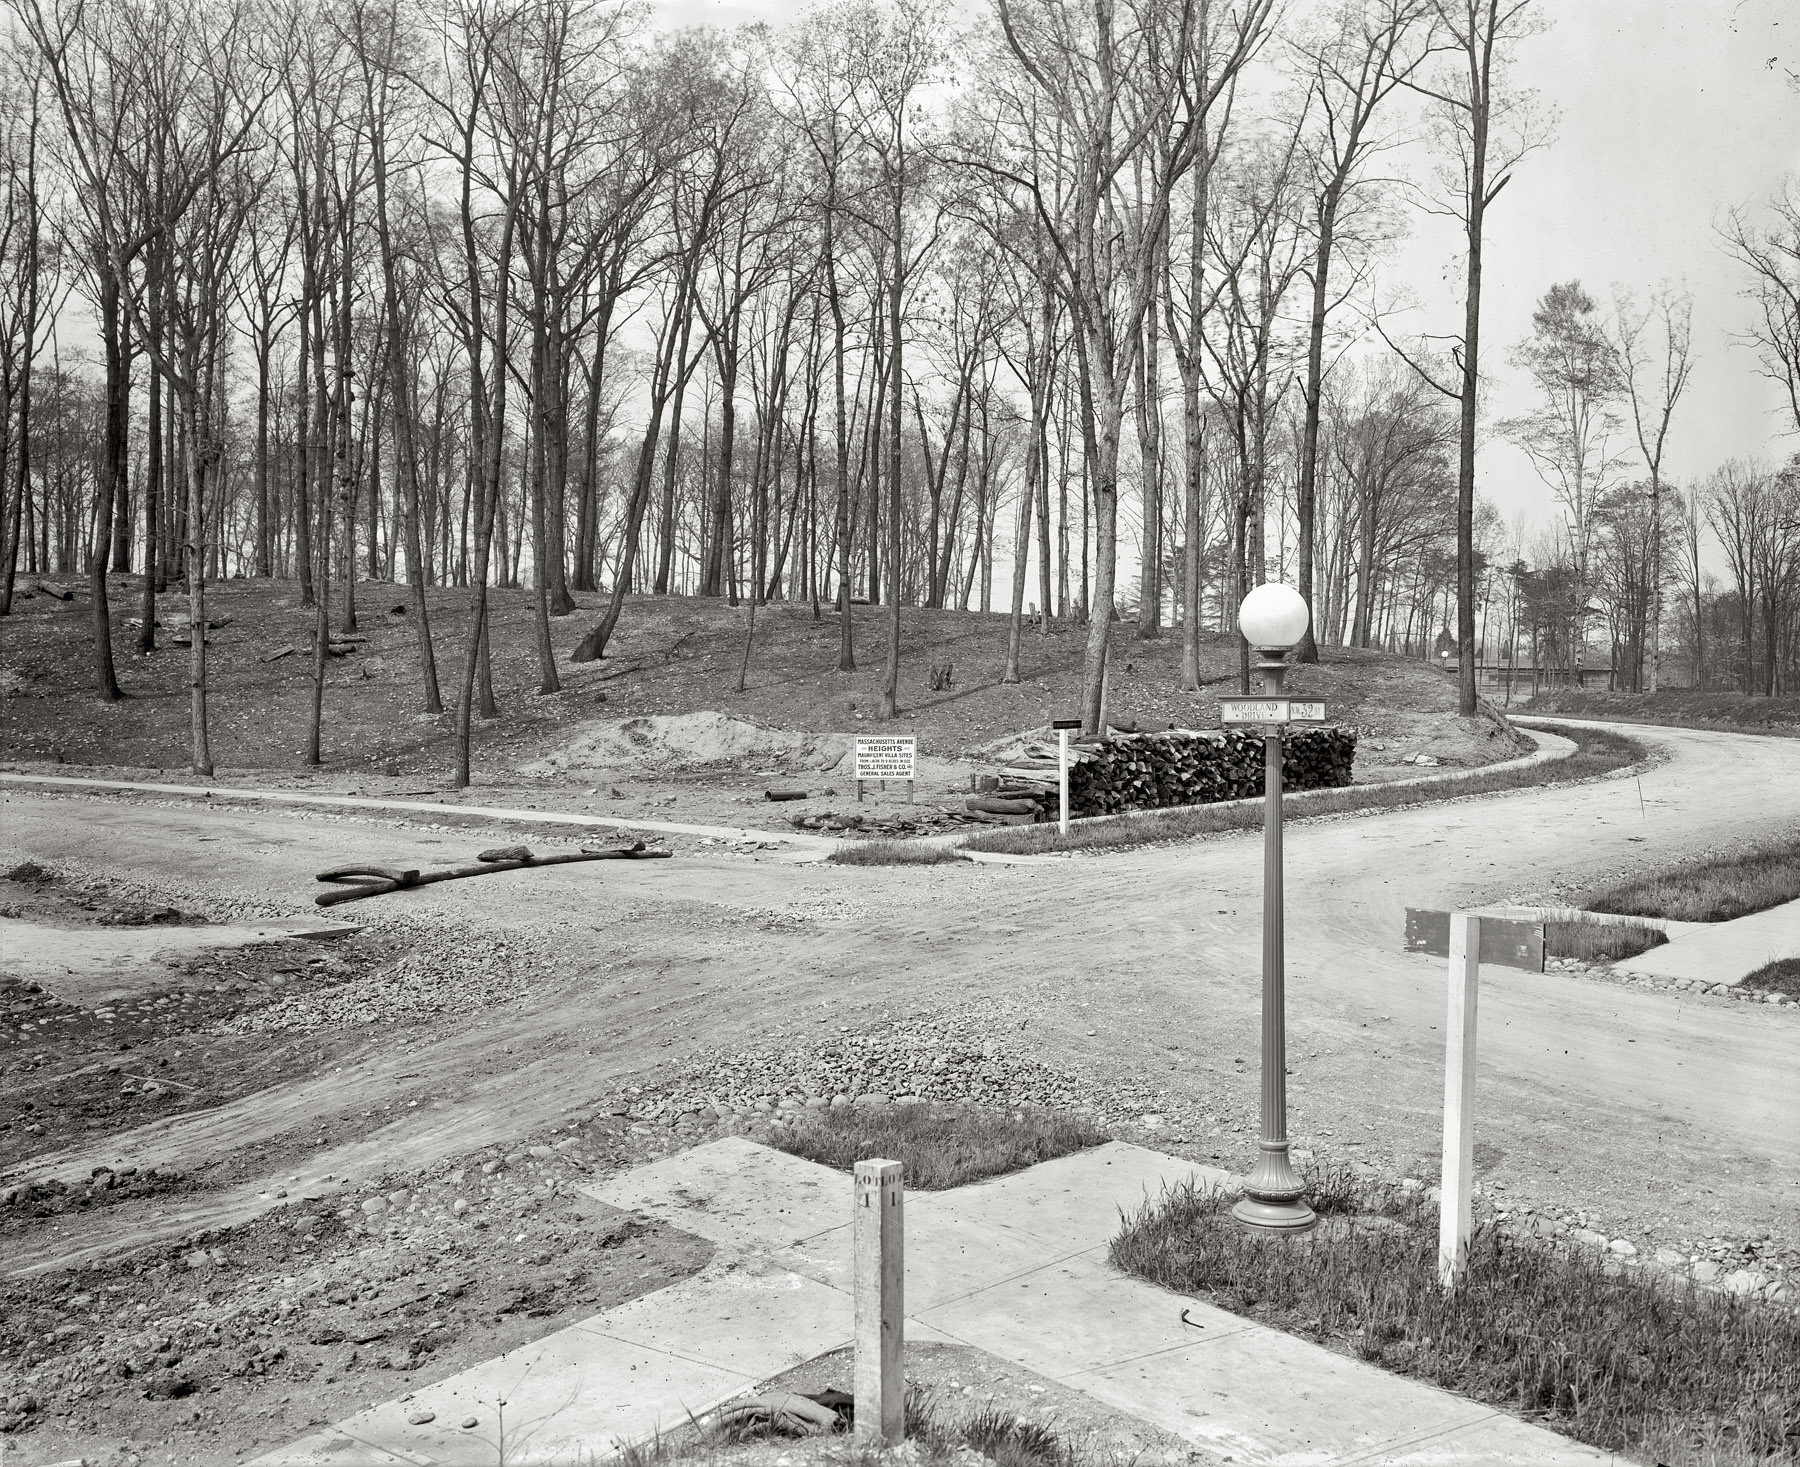 June 28, 1913. Washington, D.C. "Massachusetts Avenue Heights." Woodland Drive at 32nd Street NW. National Photo Co. glass negative. View full size.